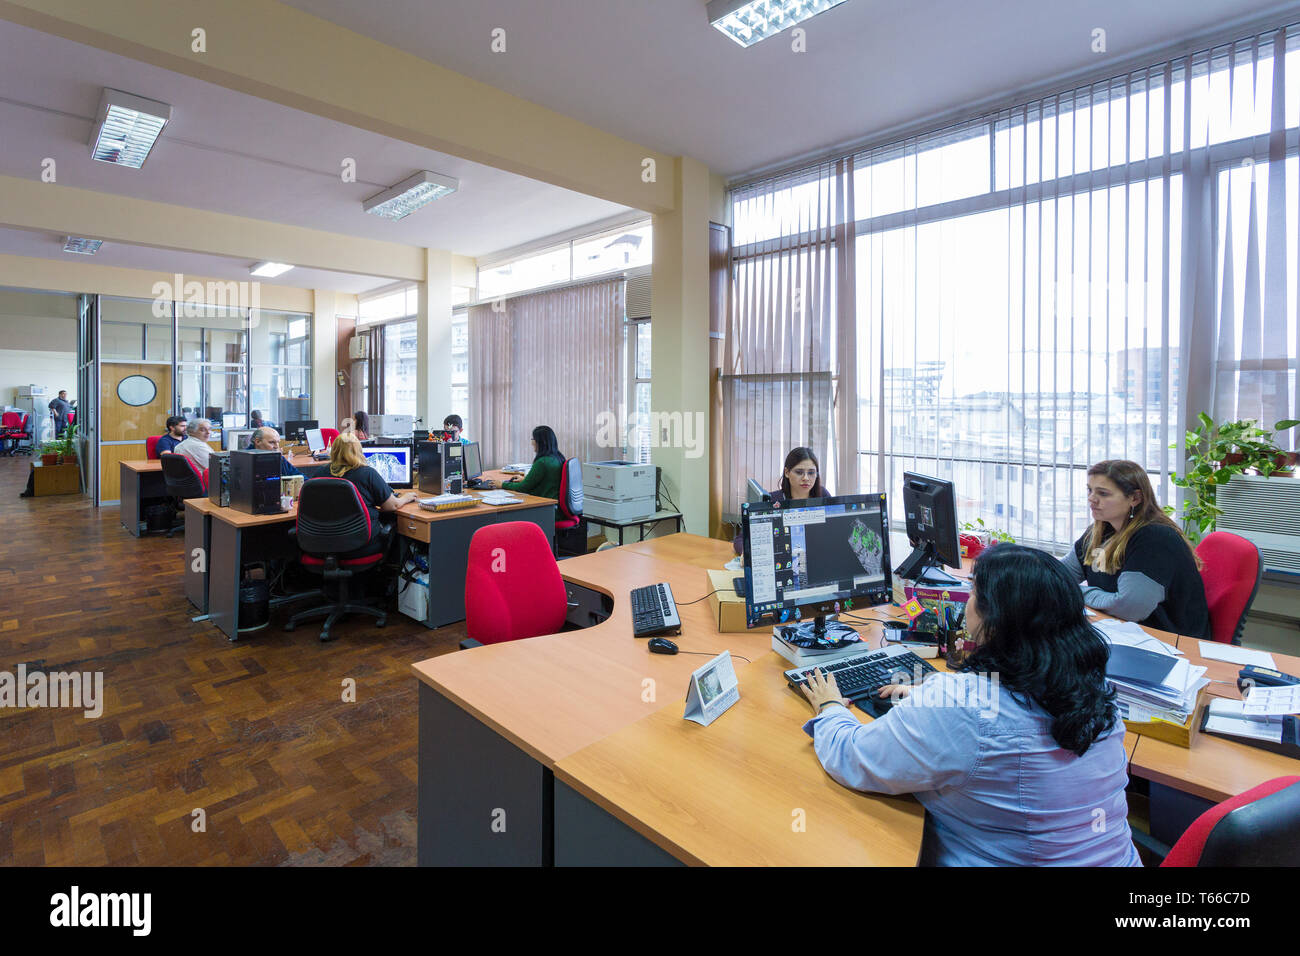 INDEC (I.N.D.E.C.) main building offices. Buenos Aires, Argentina. Stock Photo